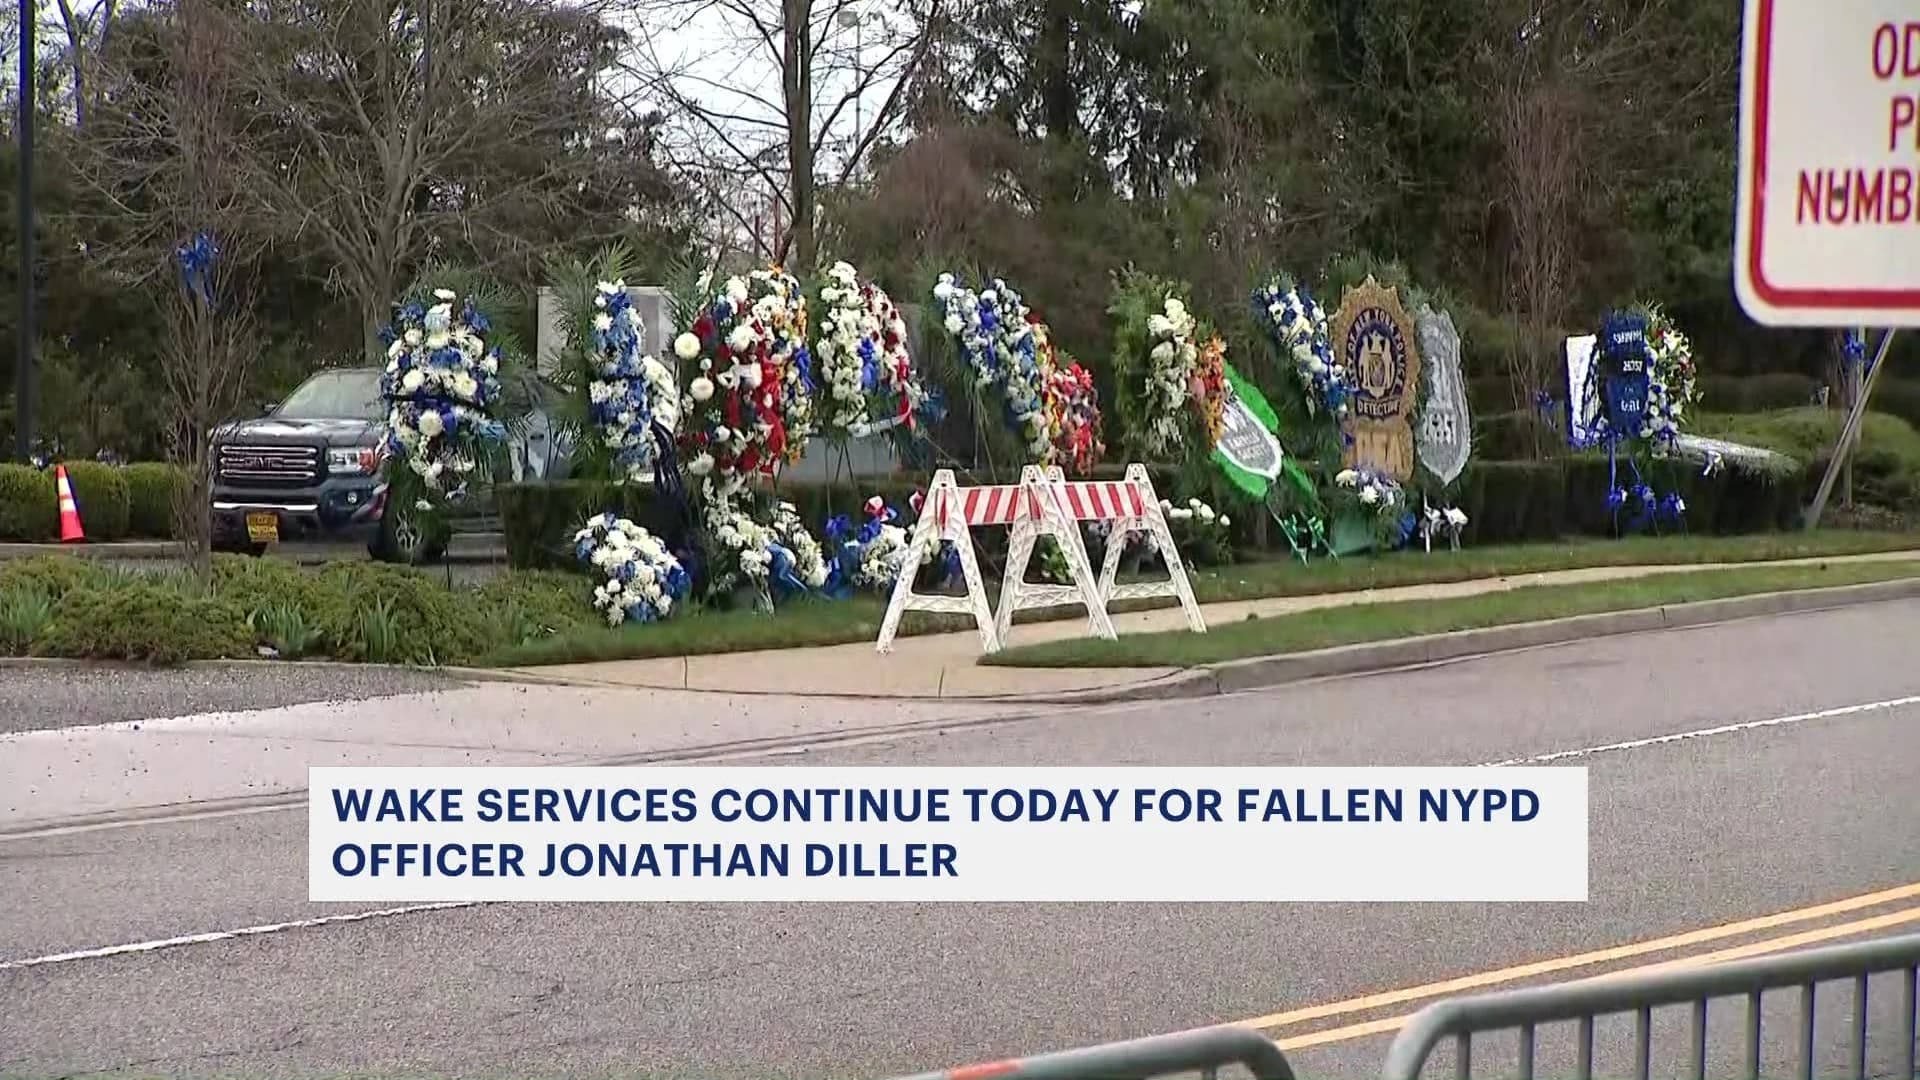 Wake services continue today for fallen NYPD officer, thousands expected to attend